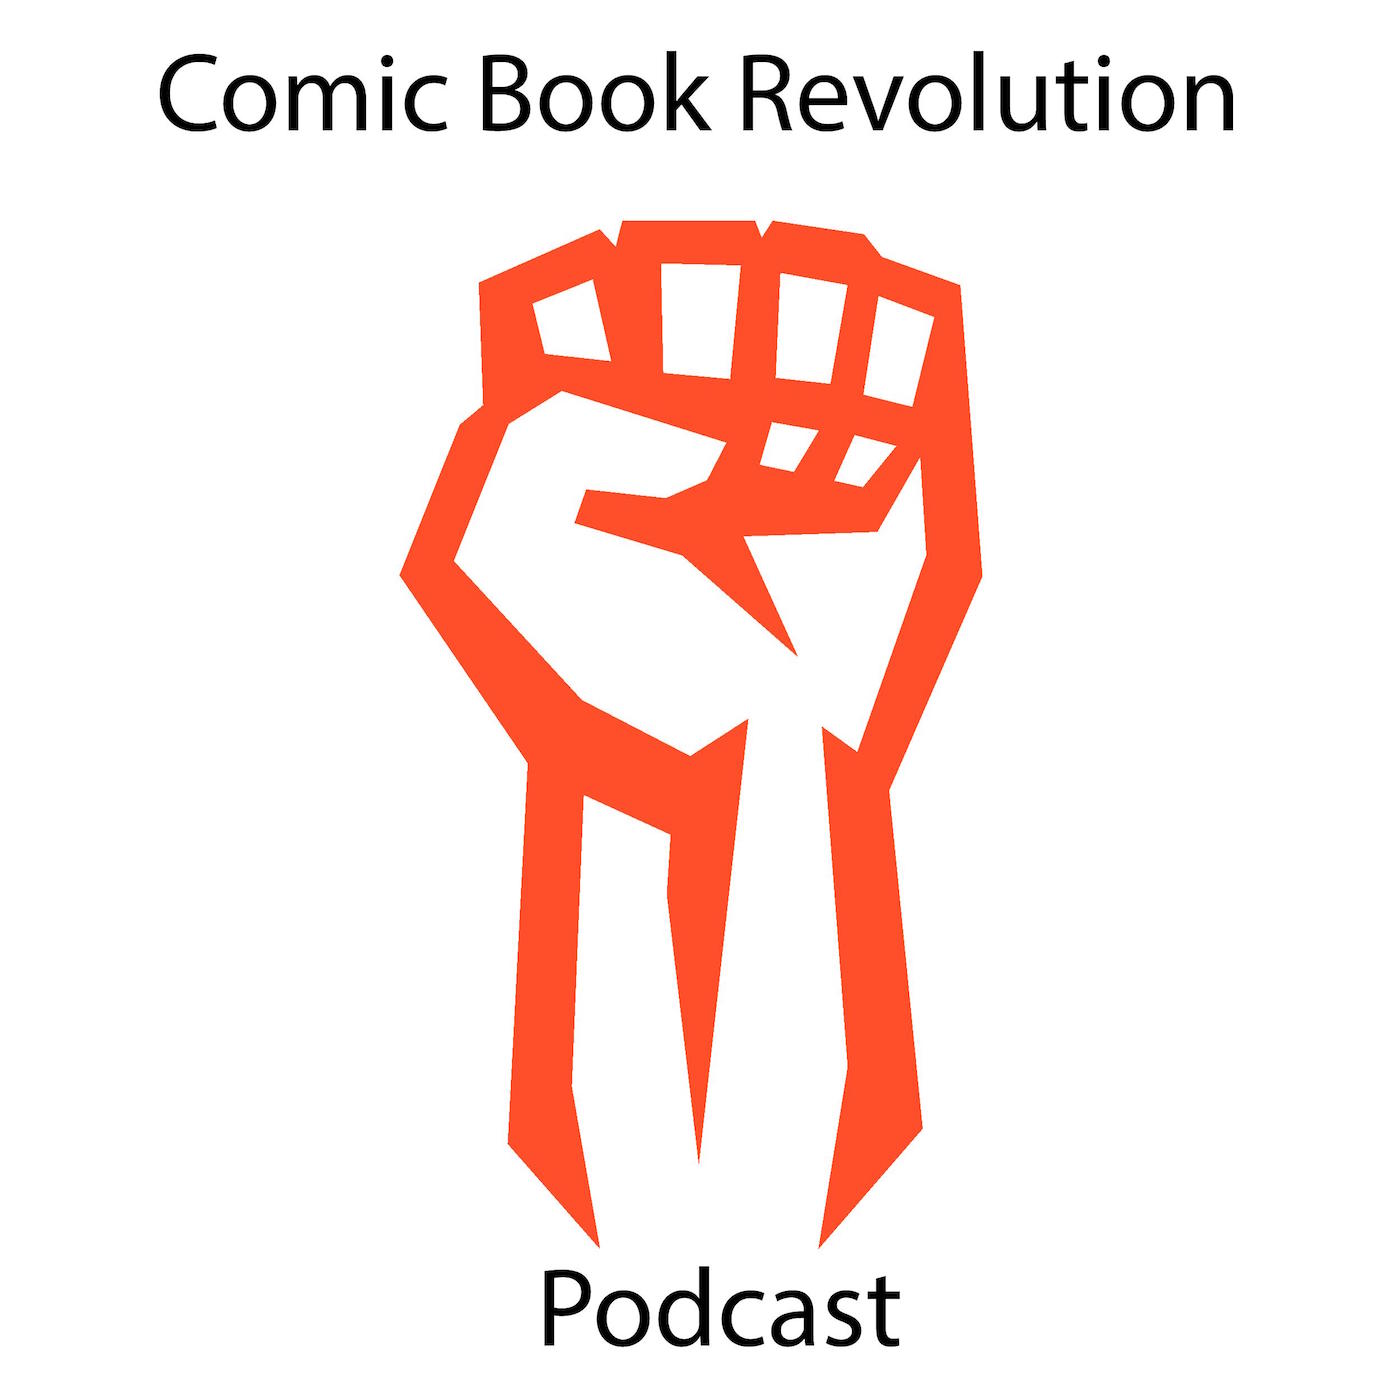 Comic Book Revolution Podcast Episode 75 - Snyder Cut Justice League Roundtable Review